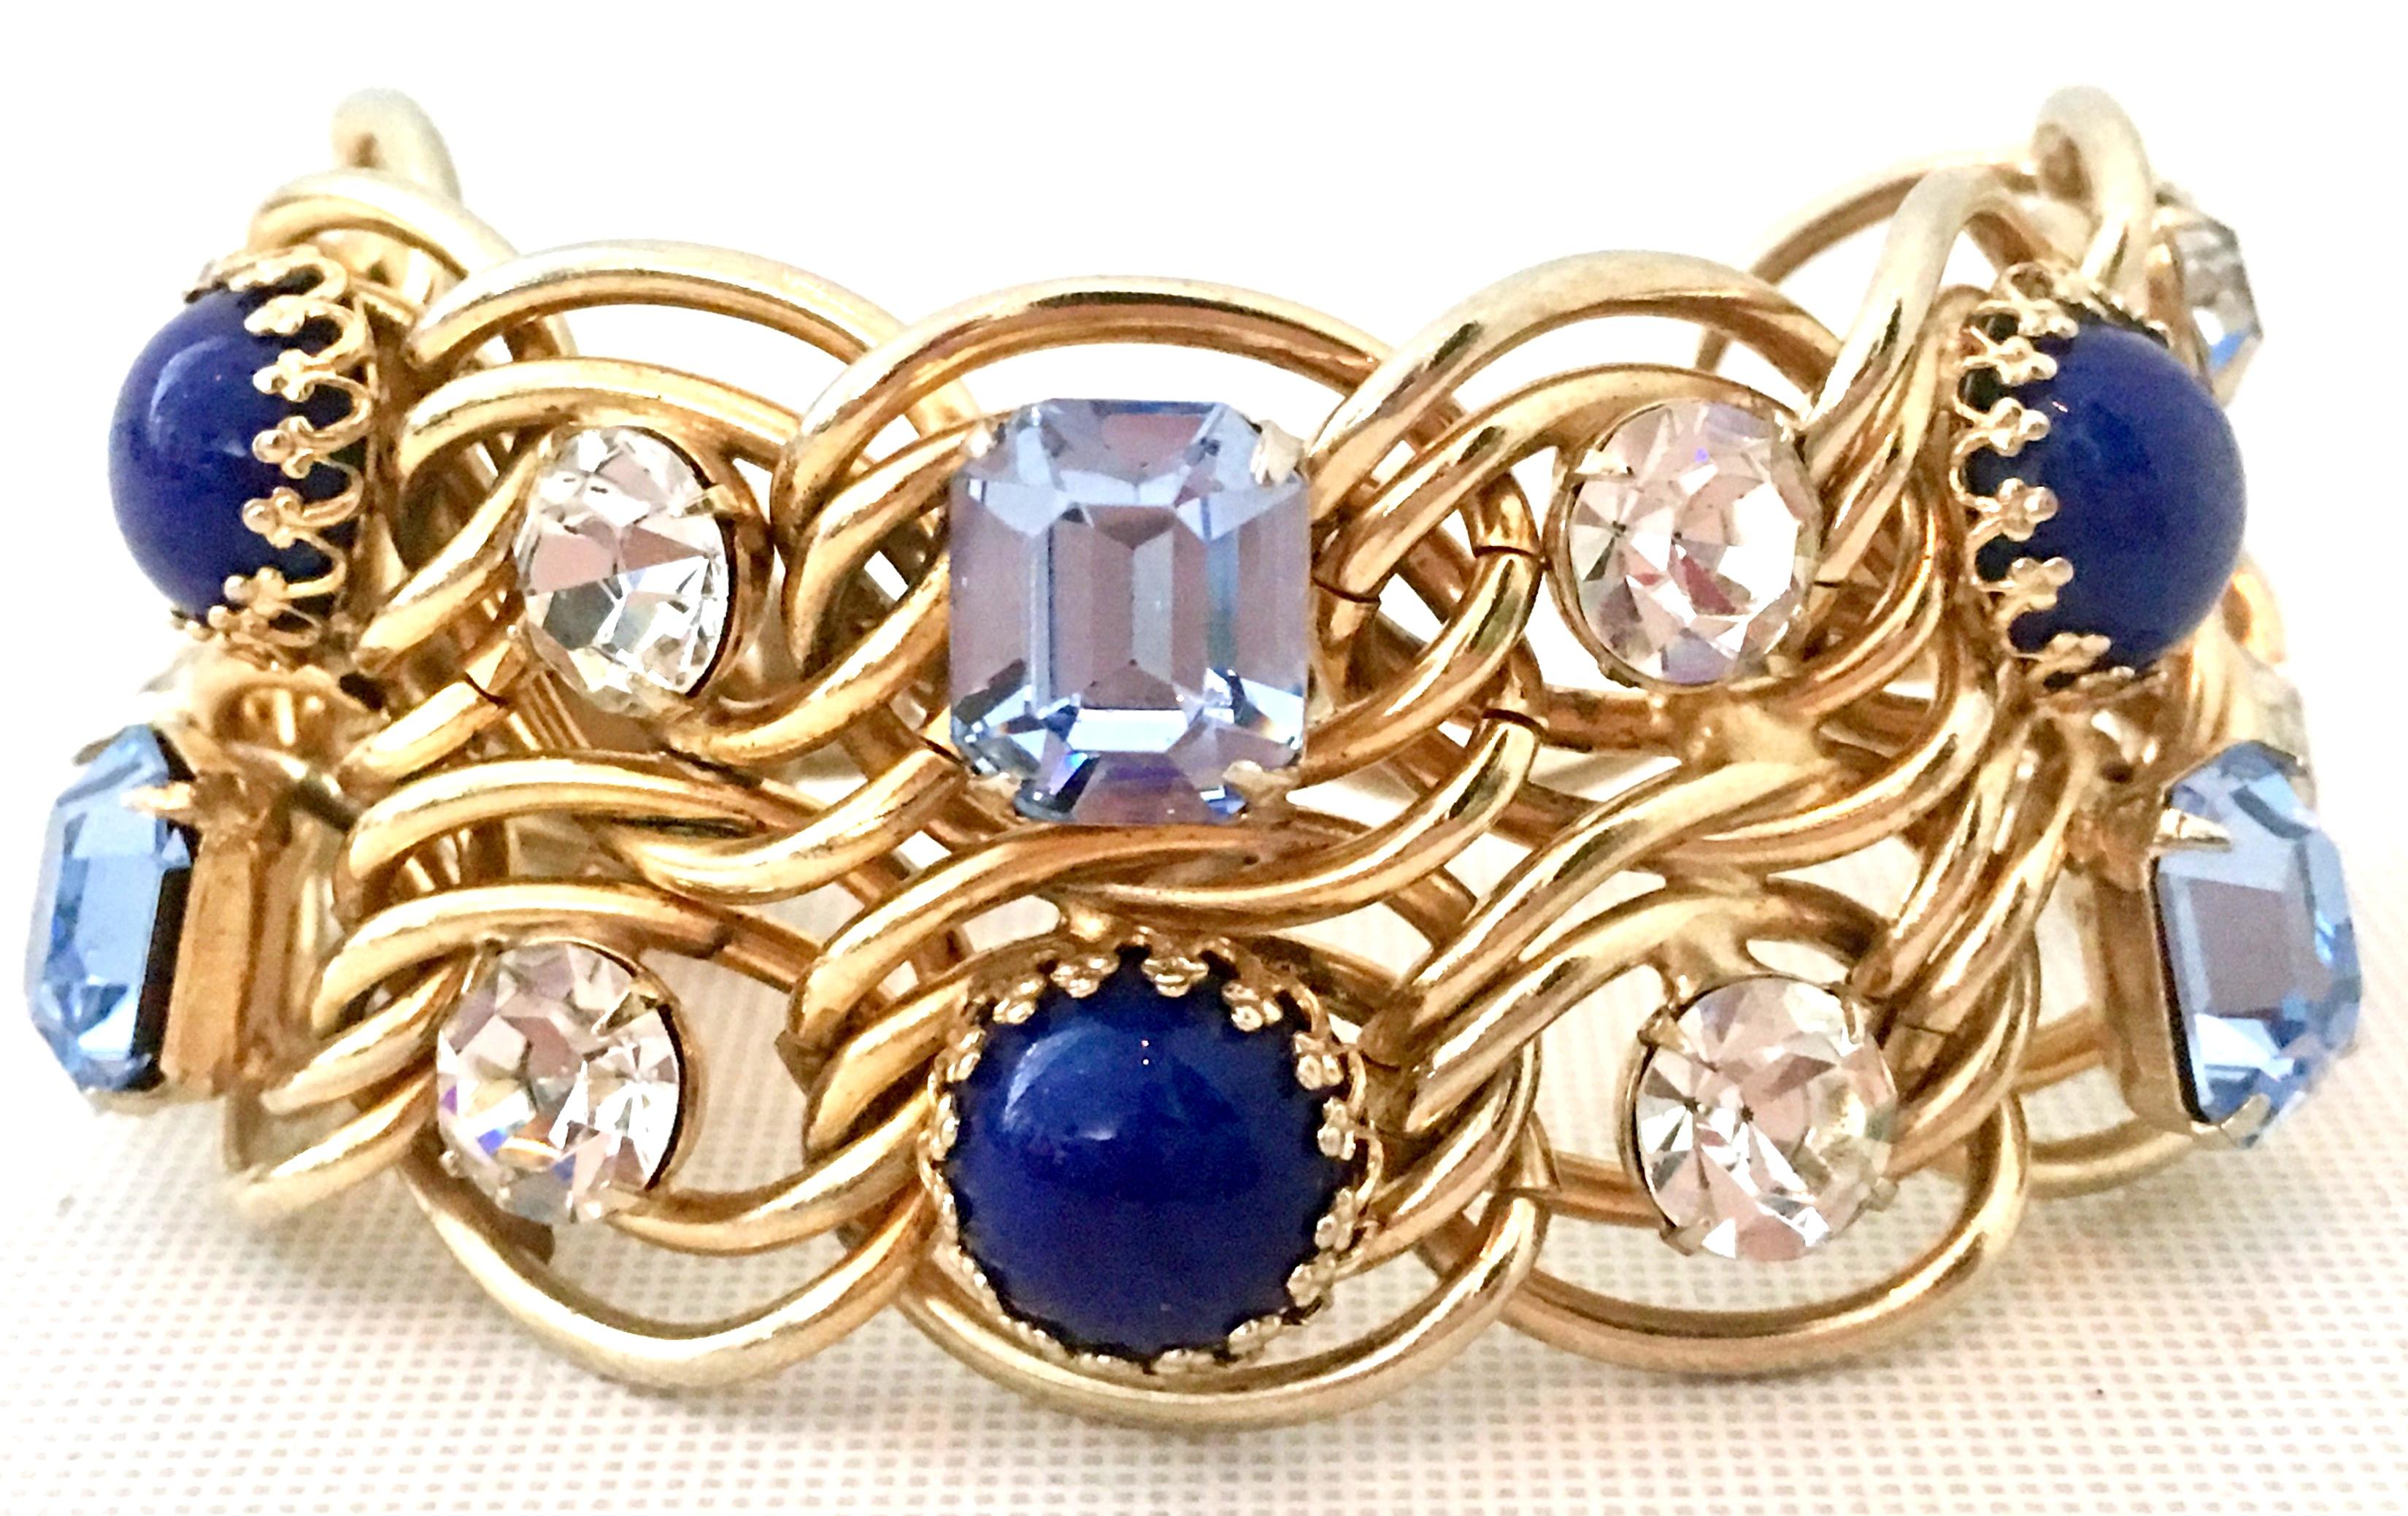 1960'S Gold Plate Blue Faux Lapis & Austrian Crystal Link Bracelet By, Elsa Schiaparelli. Features faceted prong dog tooth style set stones. The larger stones measuring approximately .50